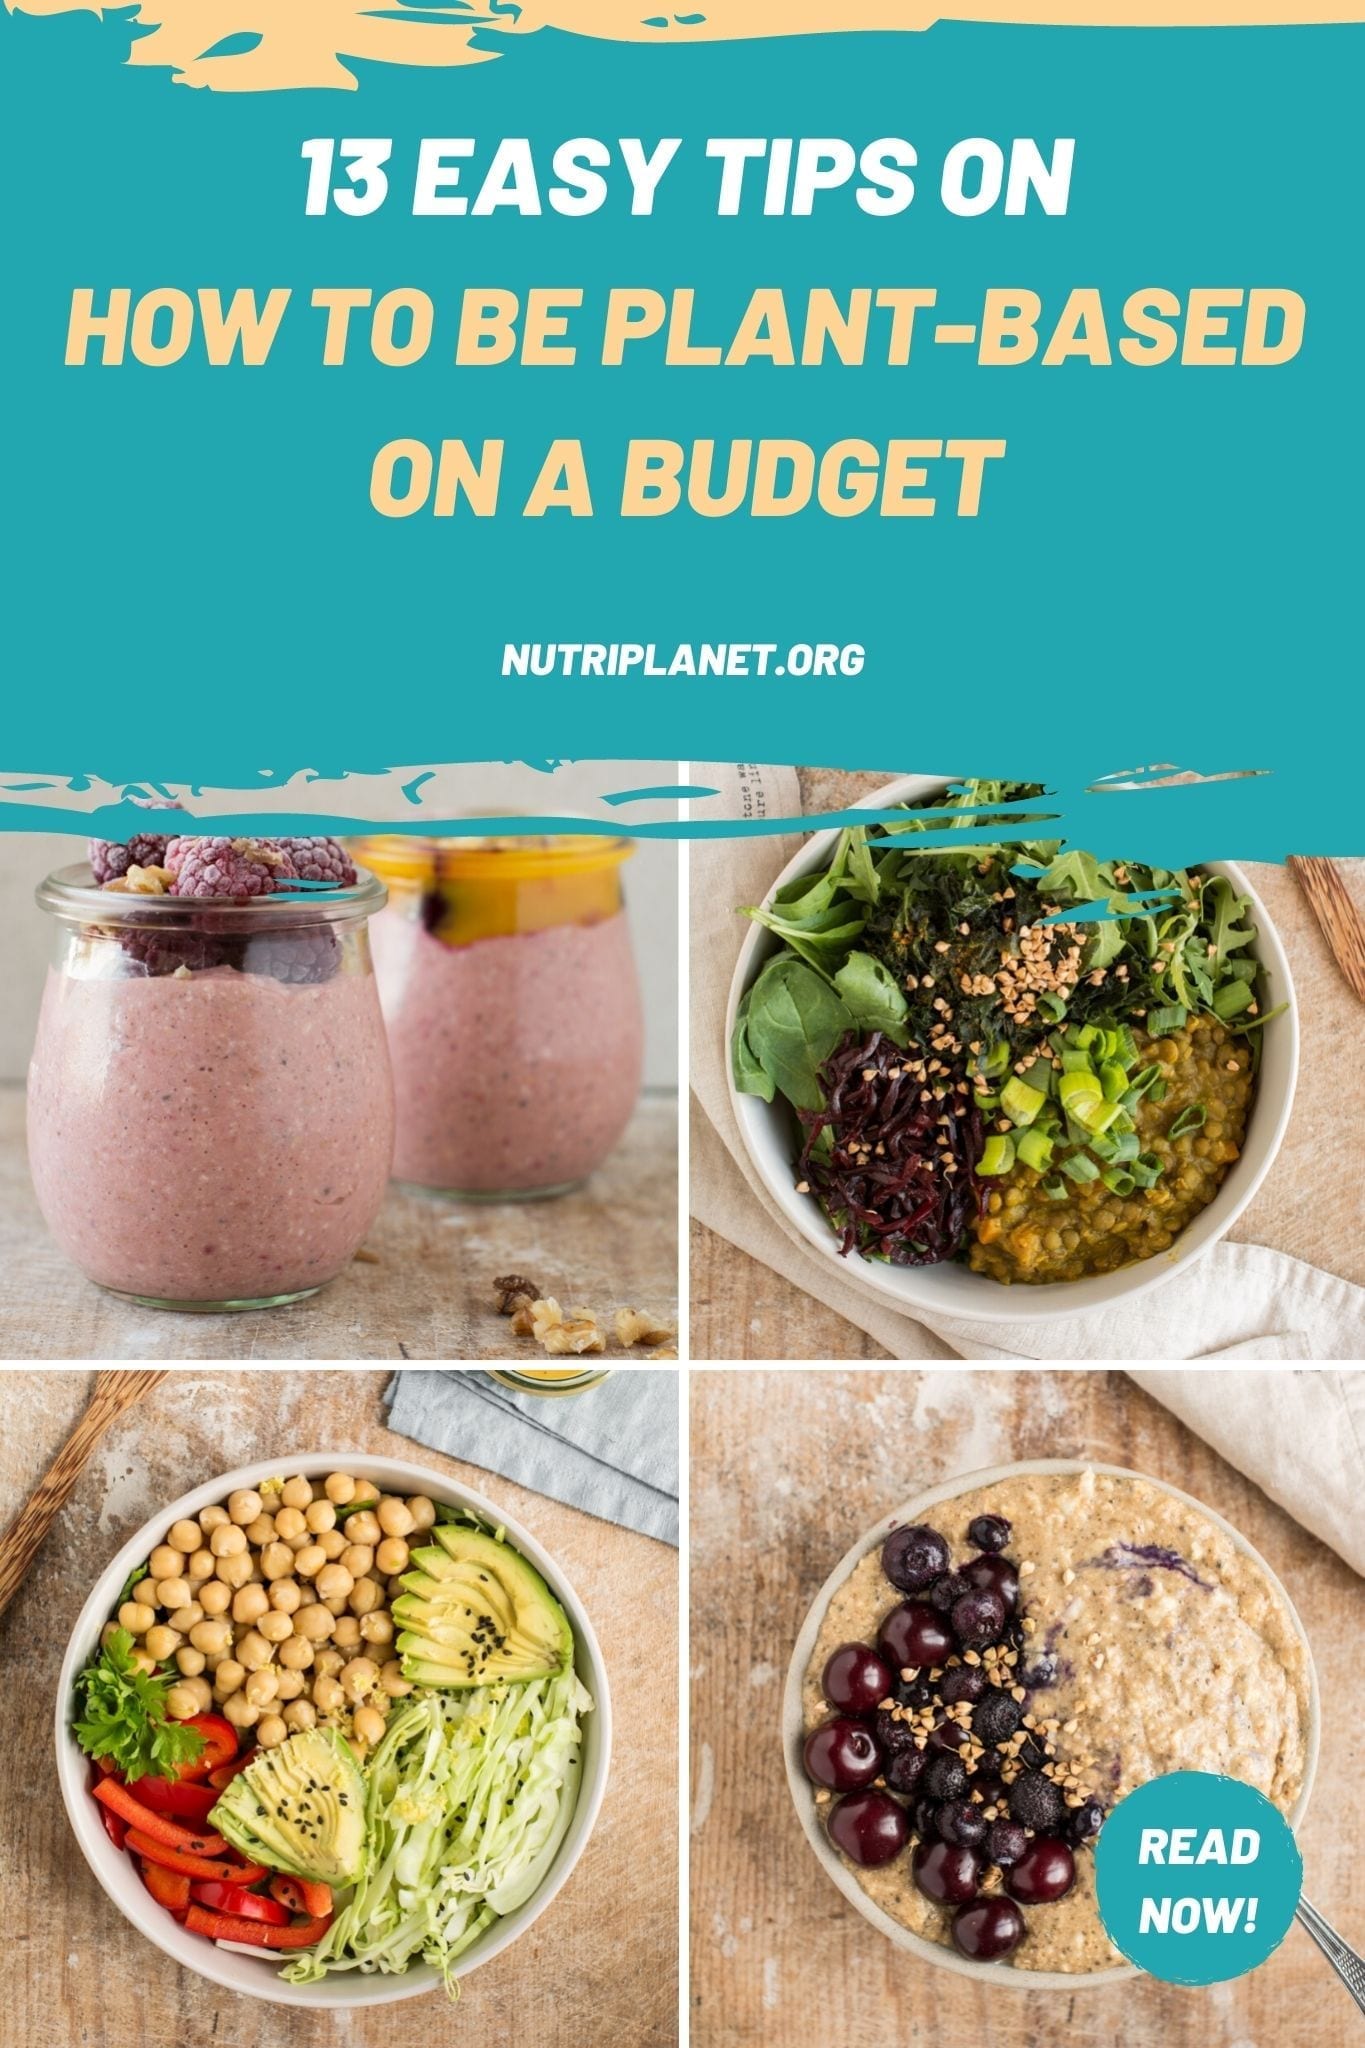 13 easy tips on how to be plant-based on a budget. Healthy and sustainable lifestyle doesn't have to be expensive!